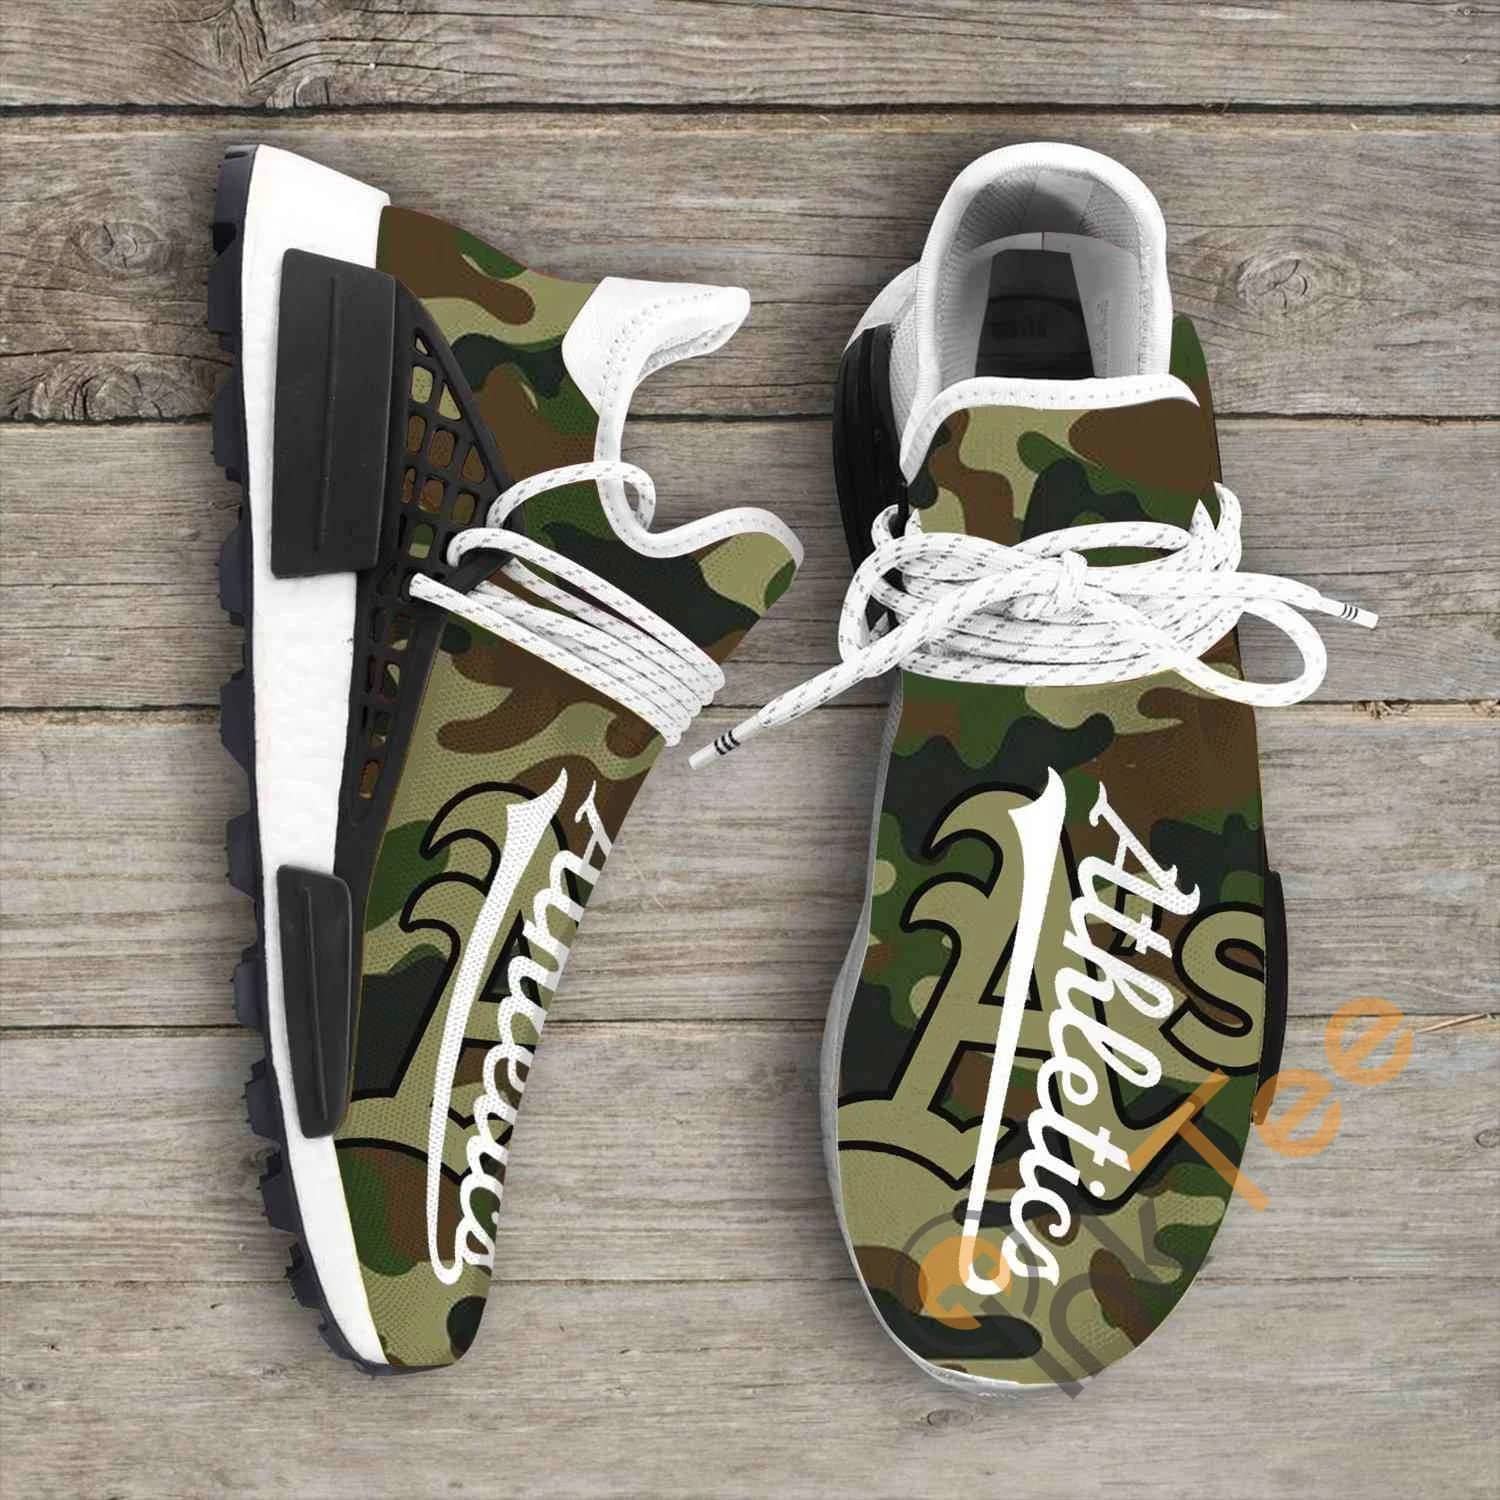 Camo Camouflage Oakland Athletics Mlb Sport Teams NMD Human Shoes